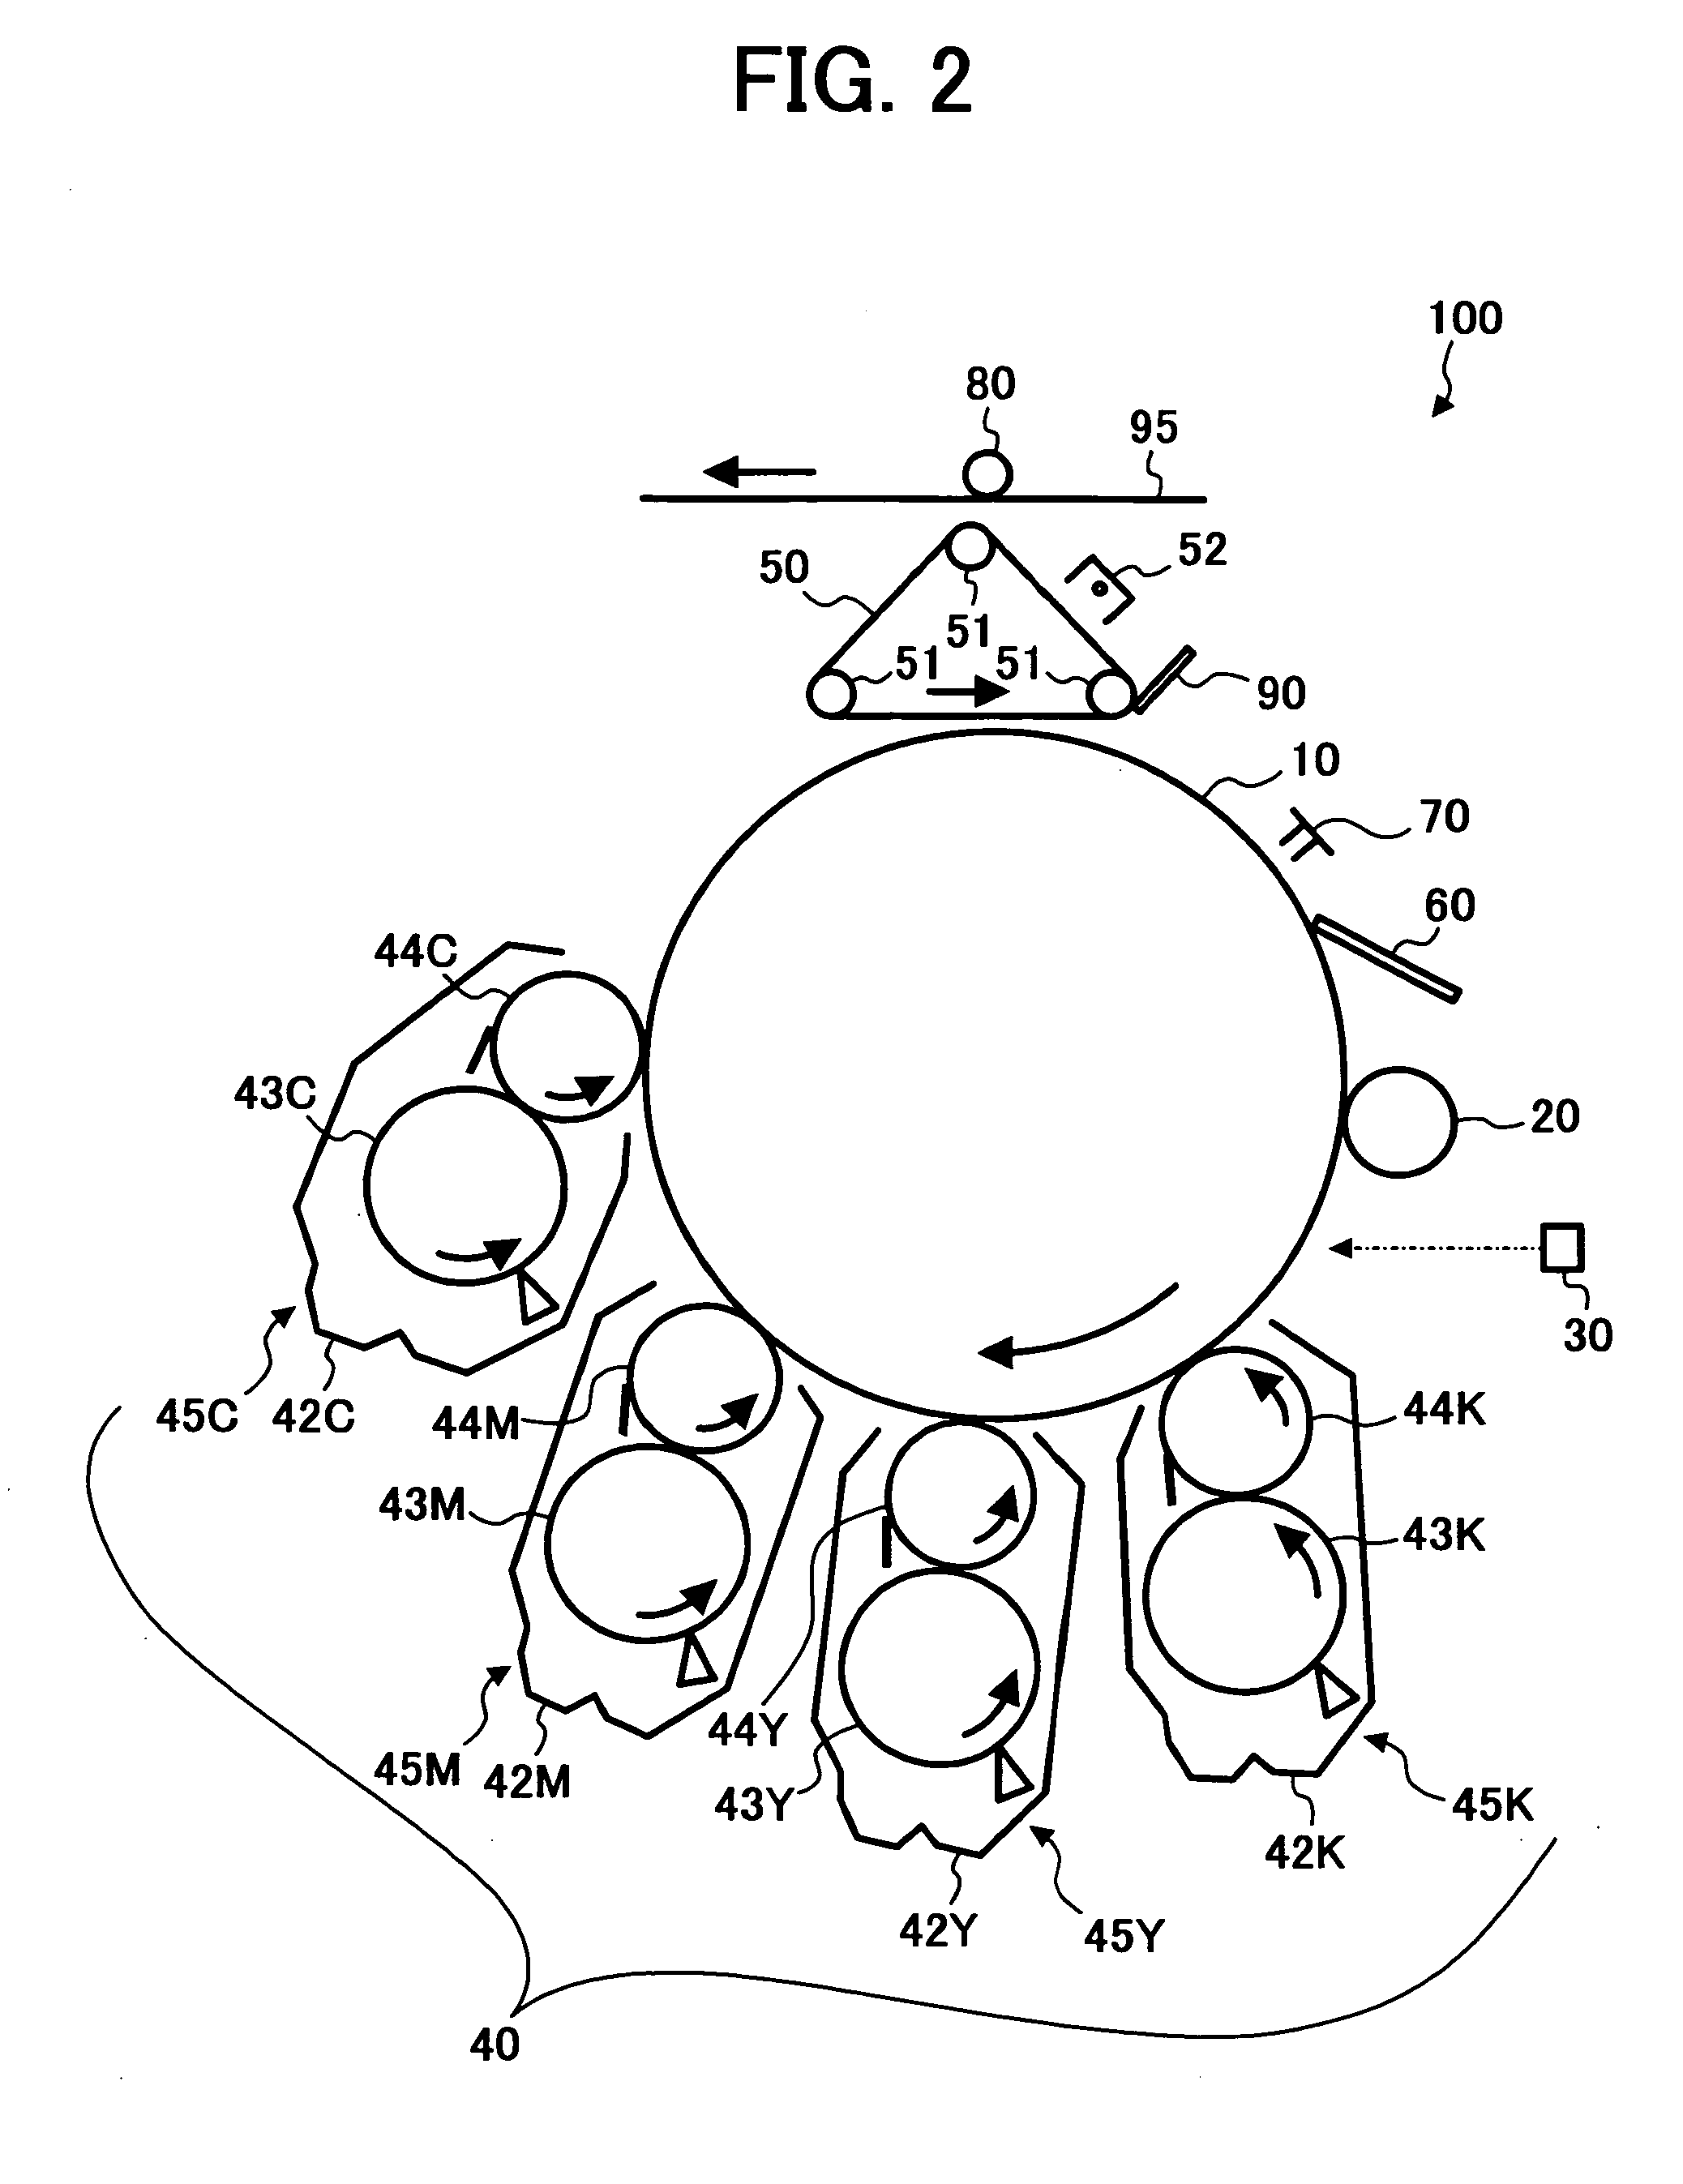 Toner for developing electrostatic image, fixing method for fixing image formed of the toner, and image forming method and process cartridge using the toner